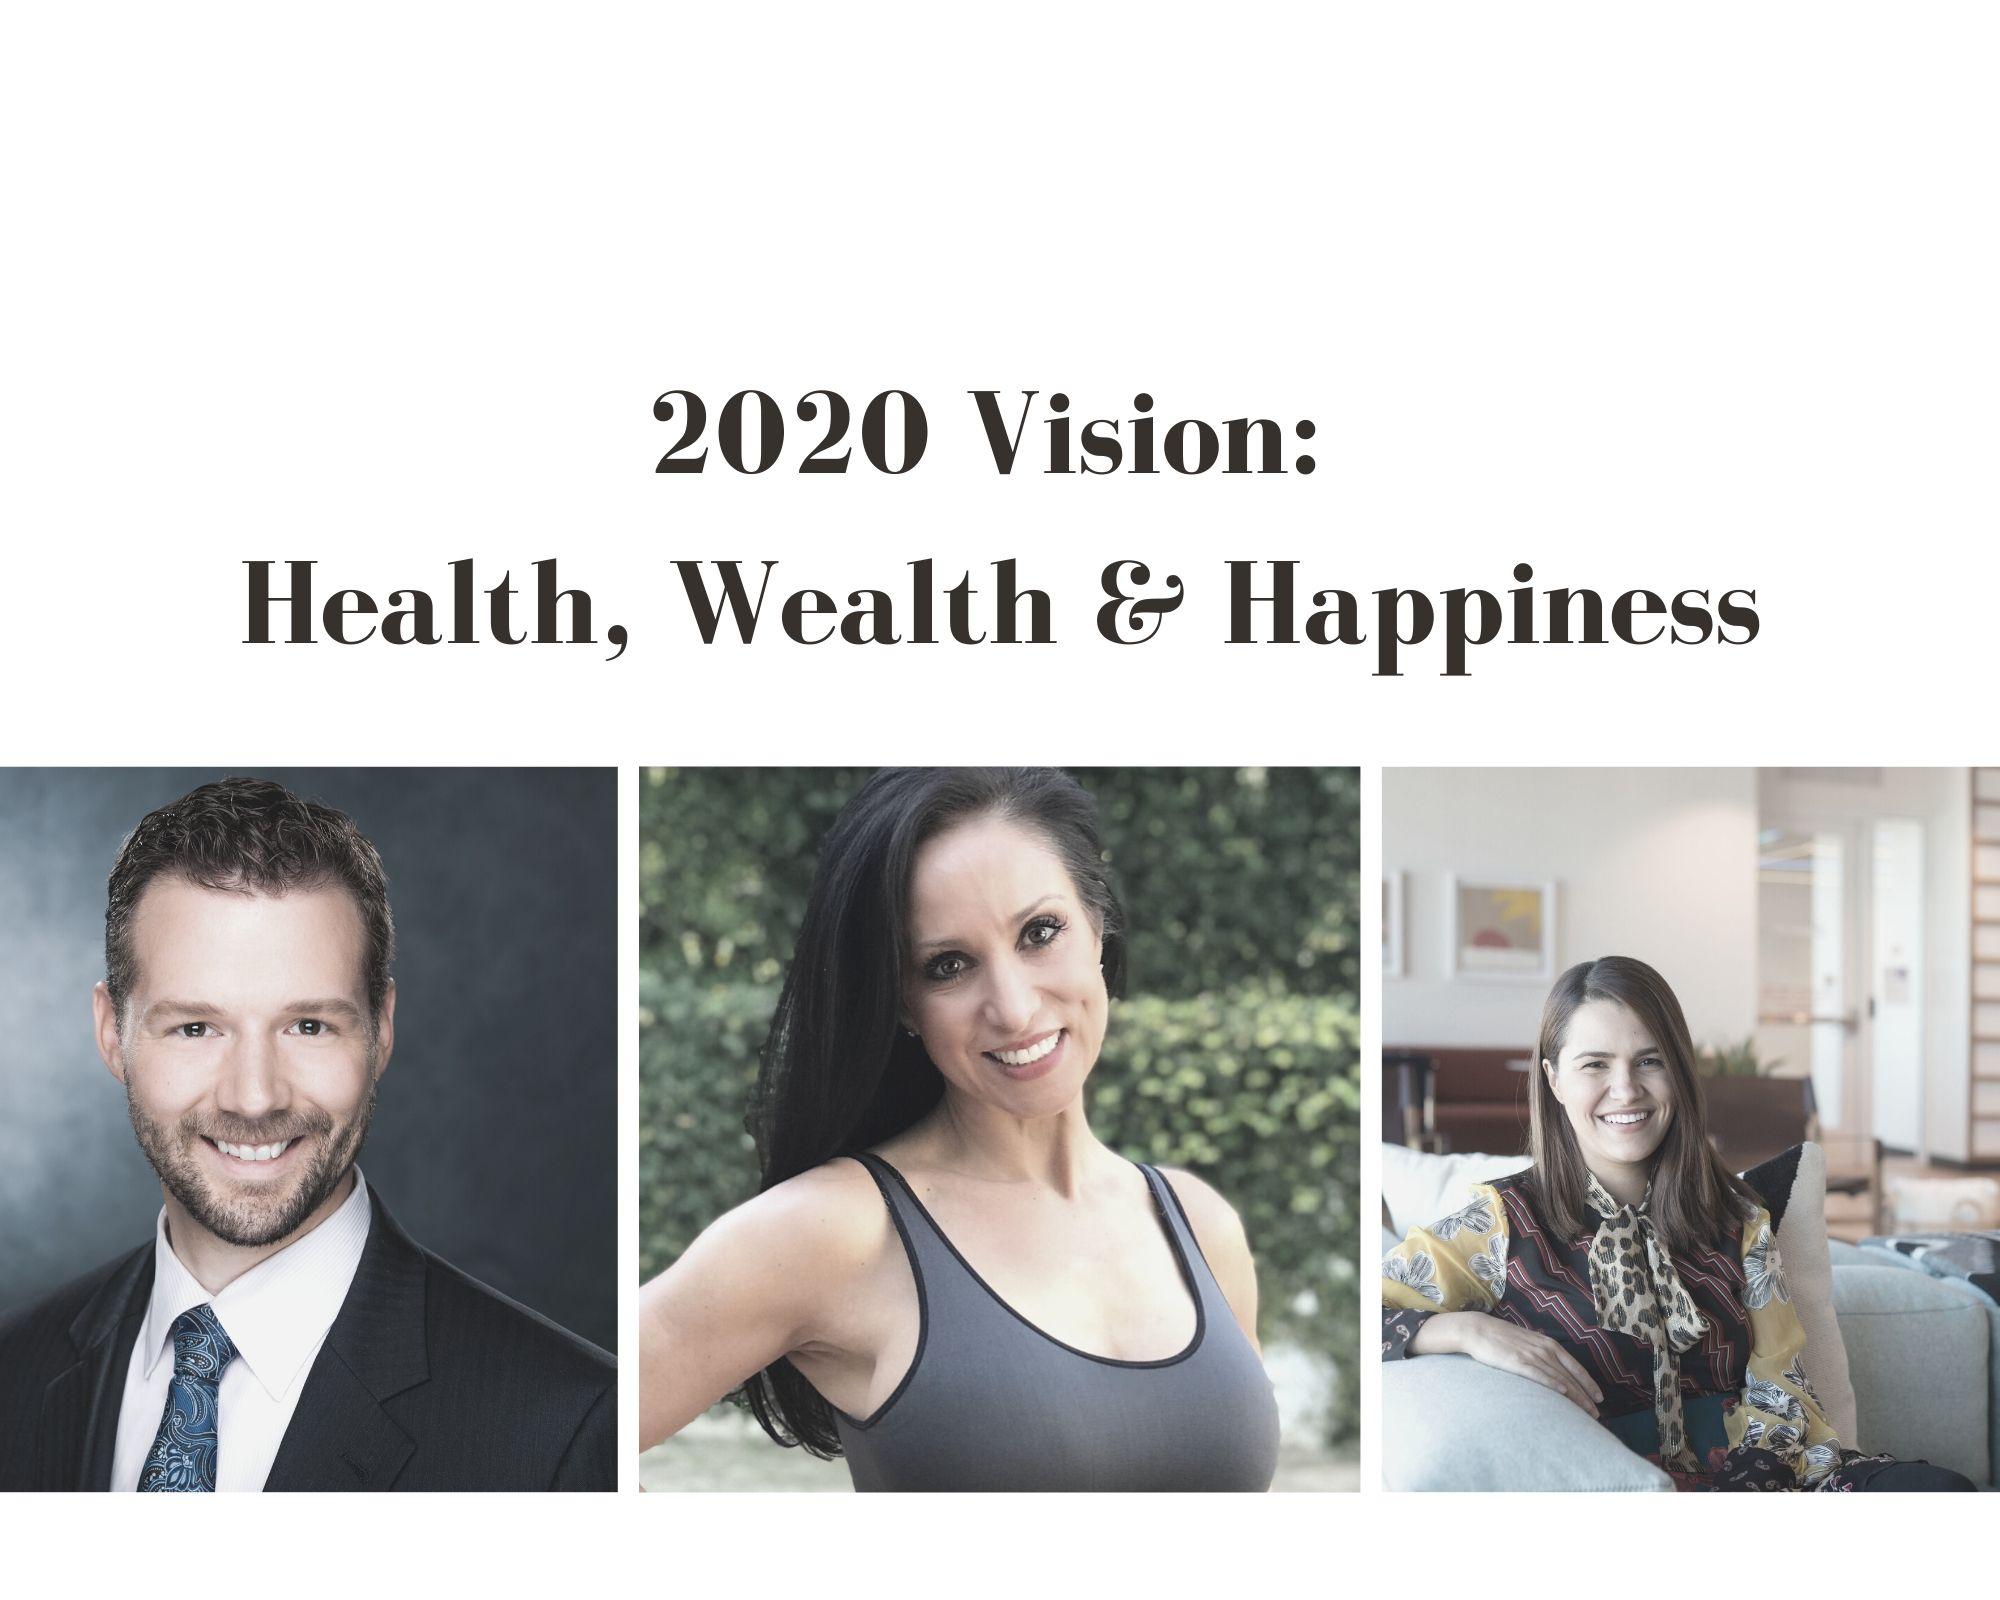 2020 Vision: Health, Wealth & Happiness